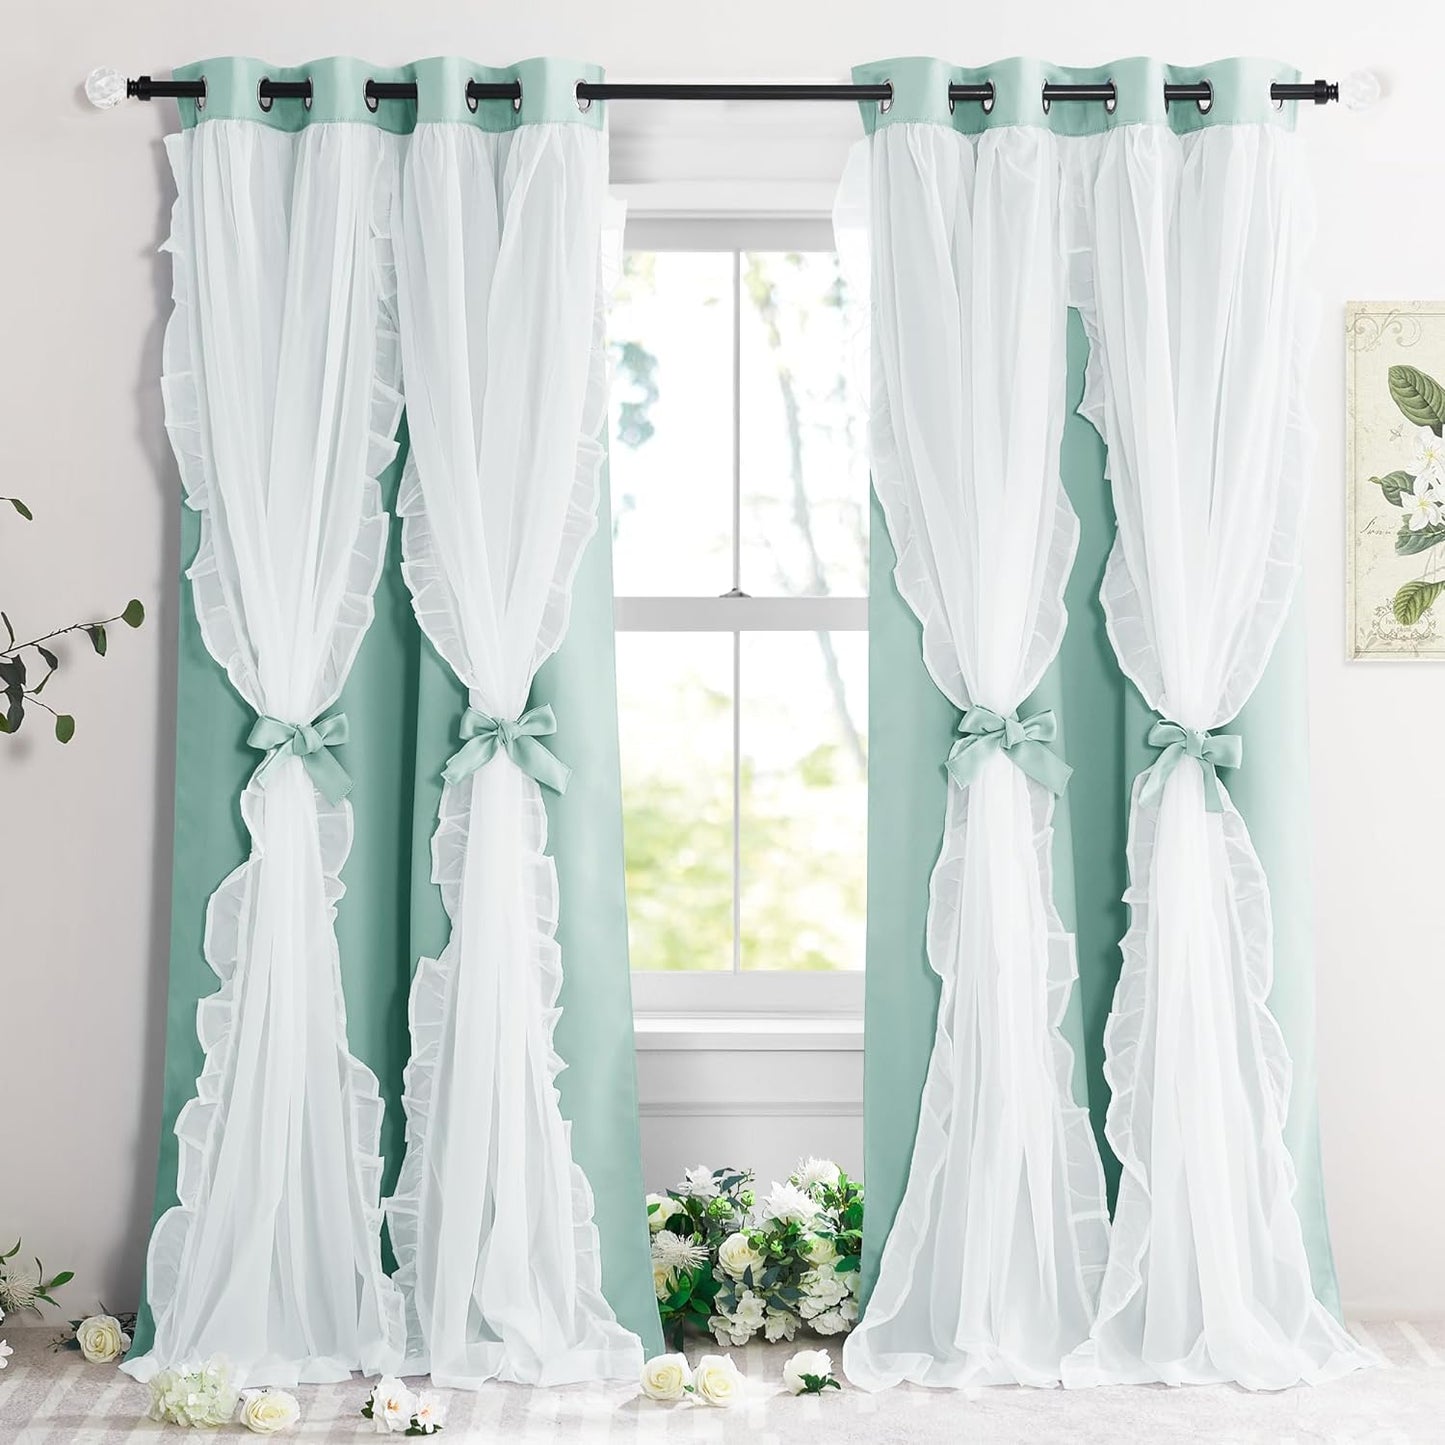 PONY DANCE Blackout Curtains for Living Room Decor Window Treatment Double Layer Drapes Ruffle Sheer Overlay Farmhouse Rustic Design, W 52 X L 84 Inches, Sage Green, 2 Panels  PONY DANCE Mint Green 52" X 84" 